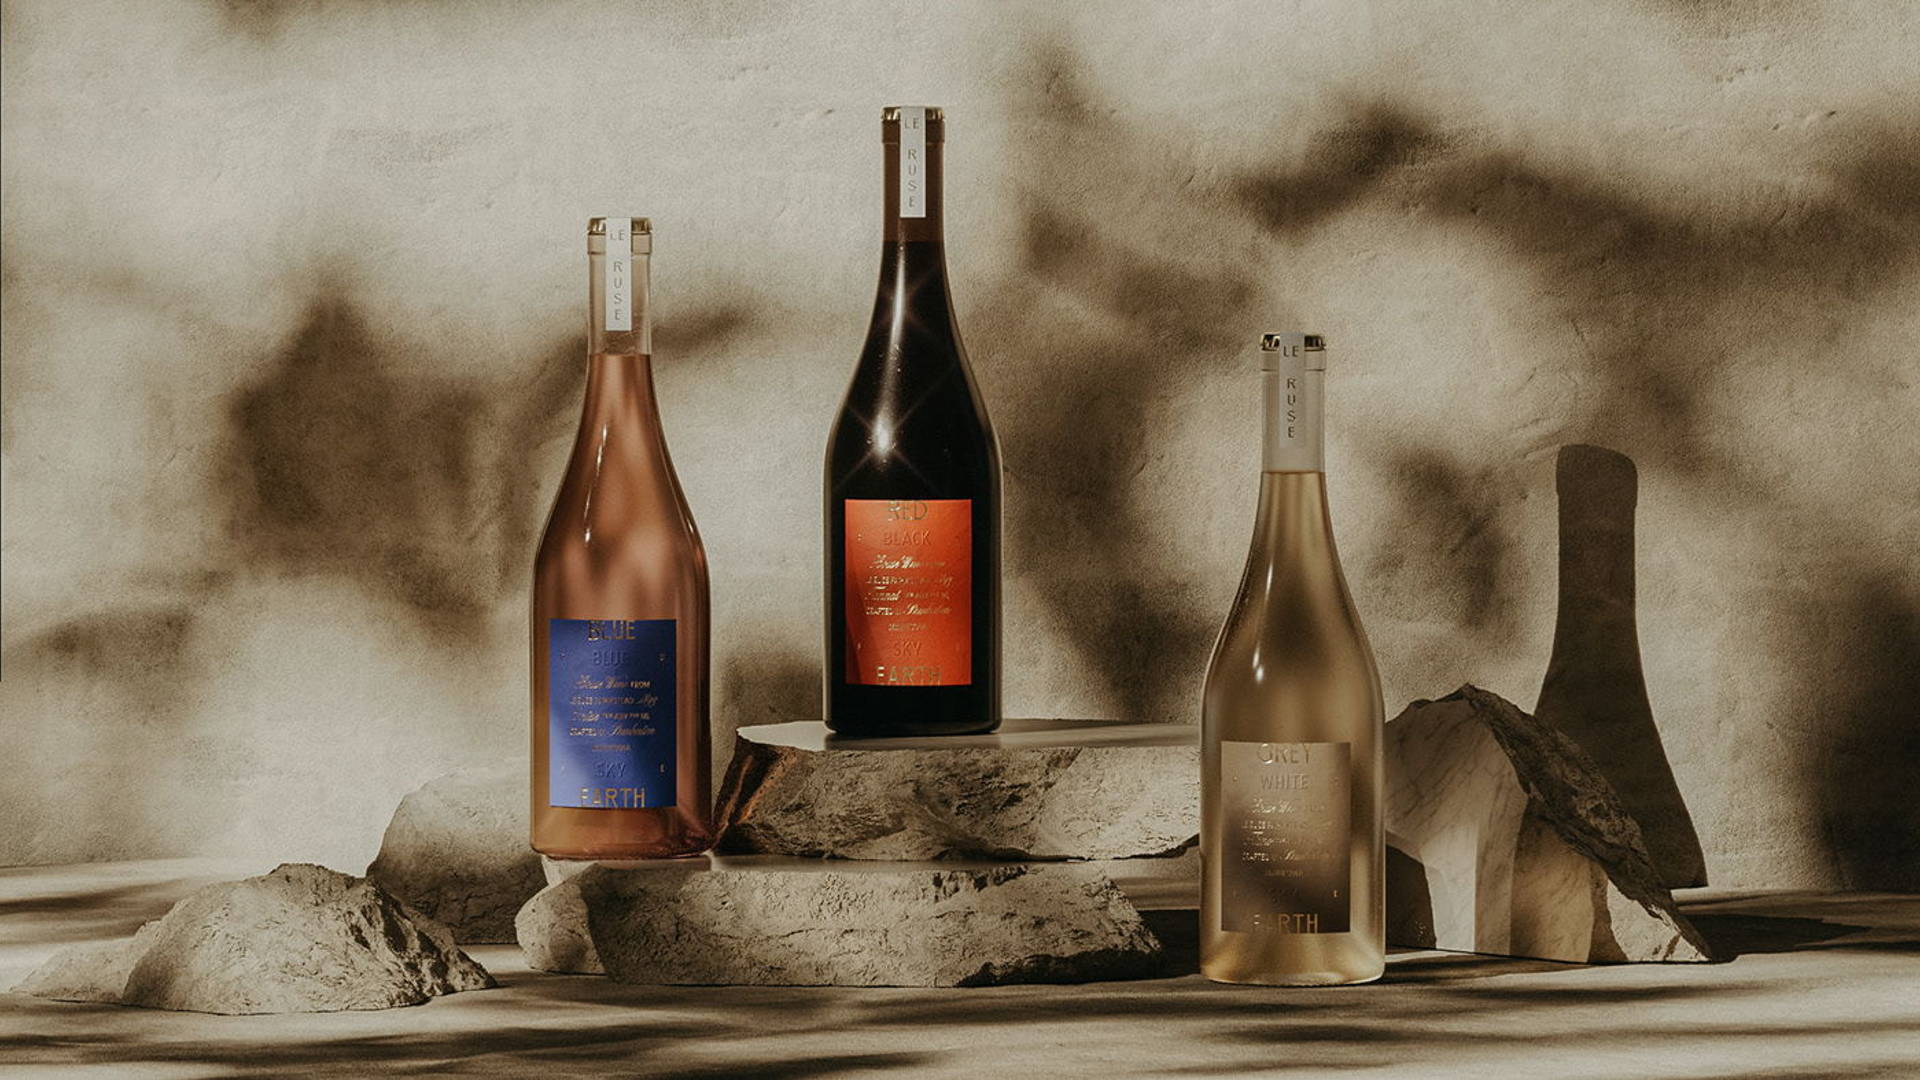 Featured image for Le Ruse Farmstead's Mysteriously Moody Packaging Design